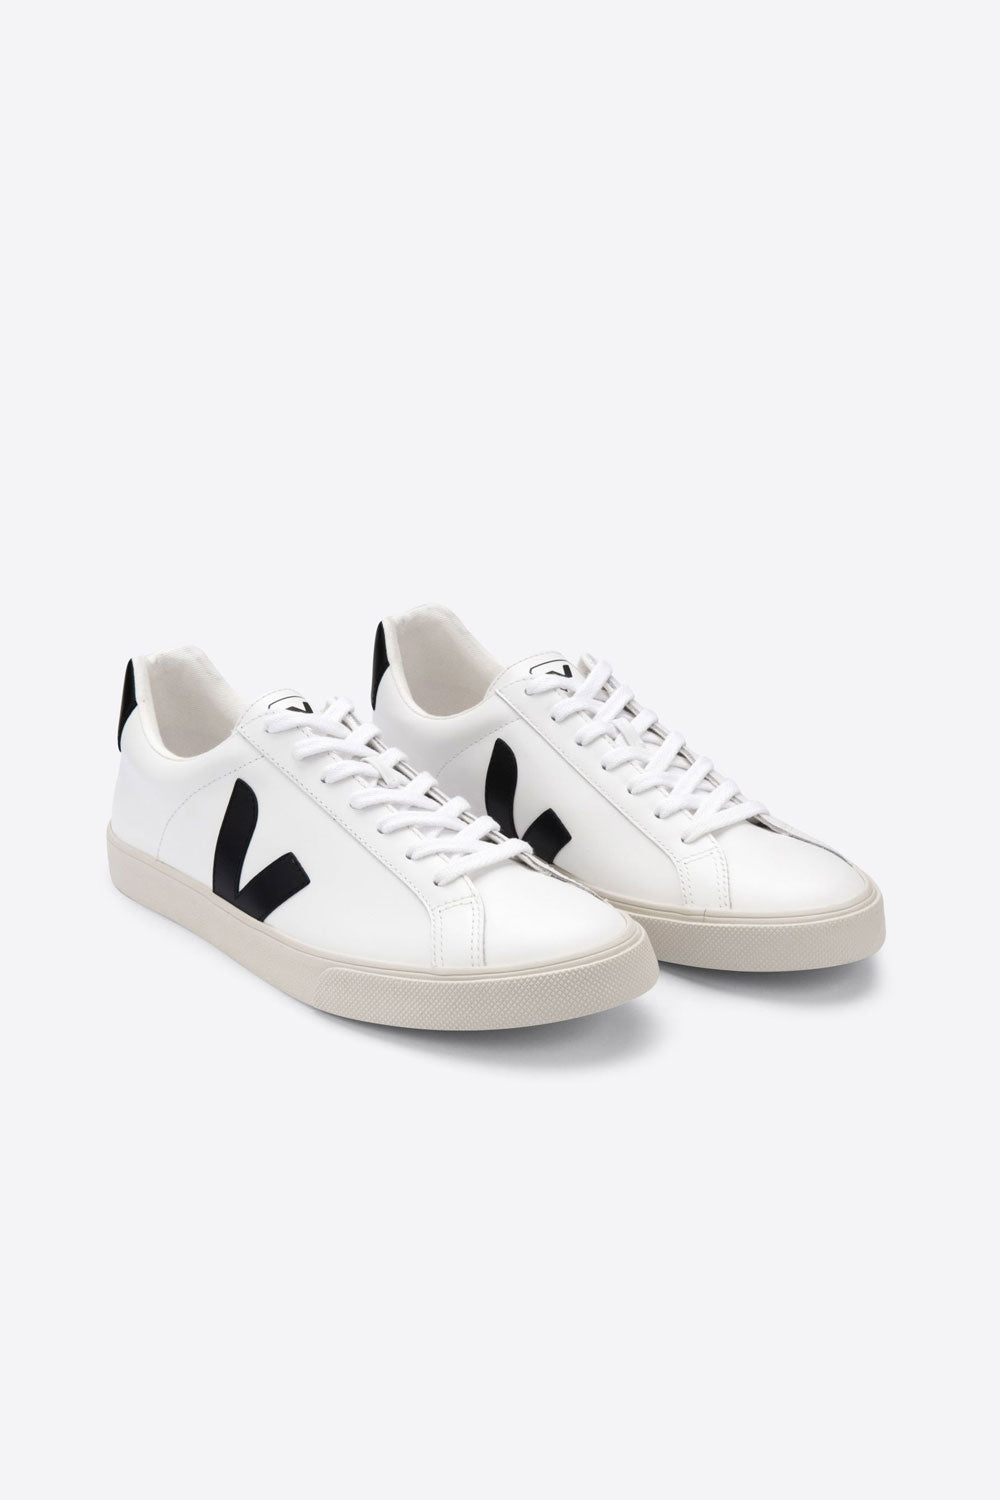 Esplar White Black Lace-Up Leather Sneakers